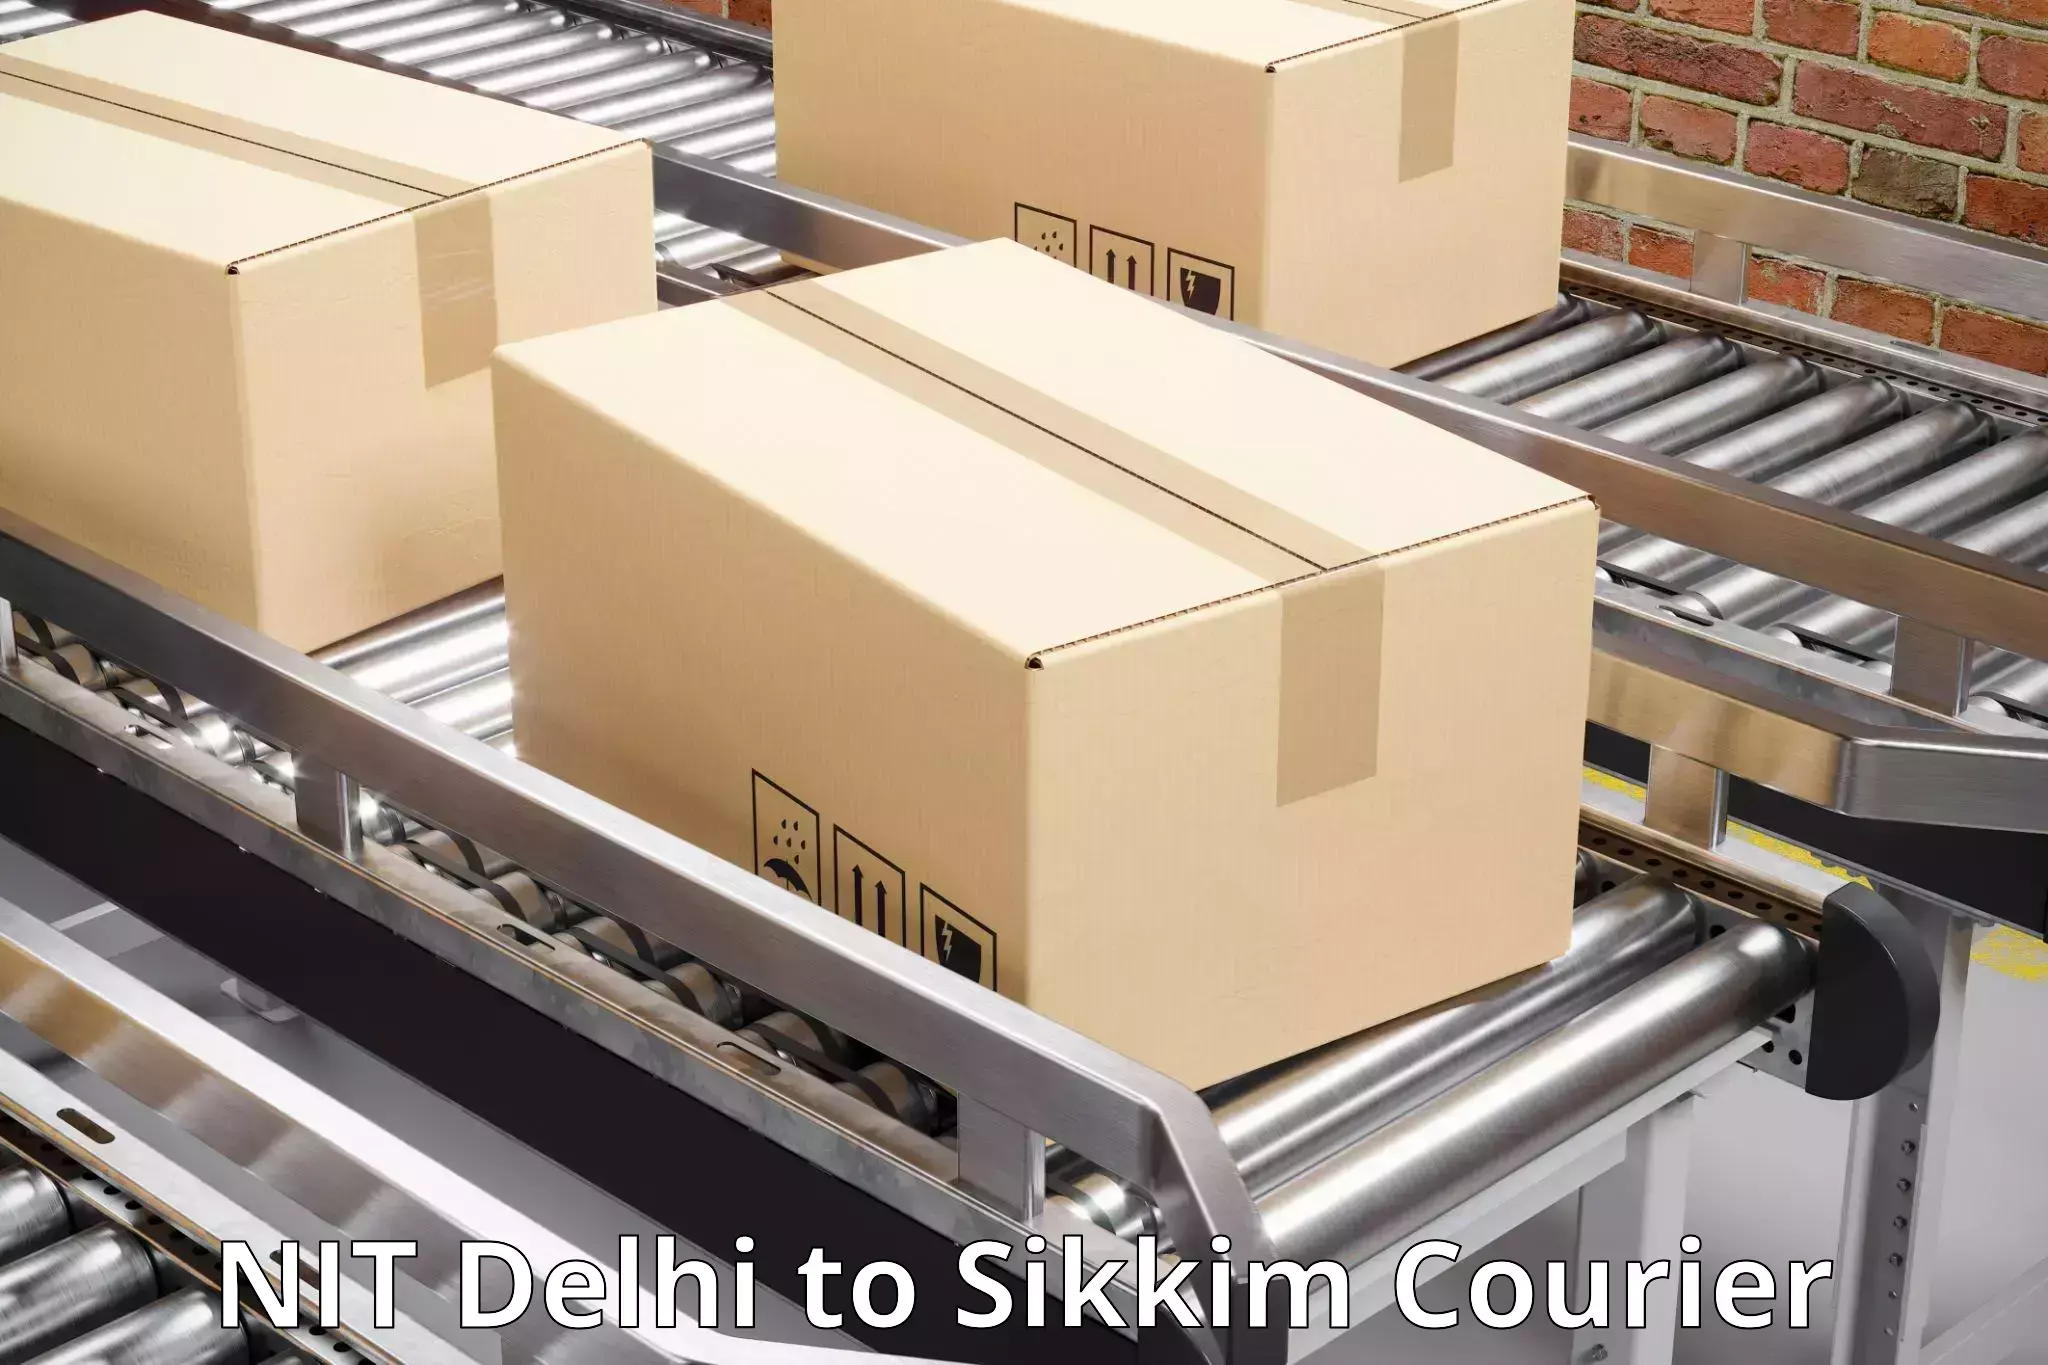 Ocean freight courier NIT Delhi to South Sikkim